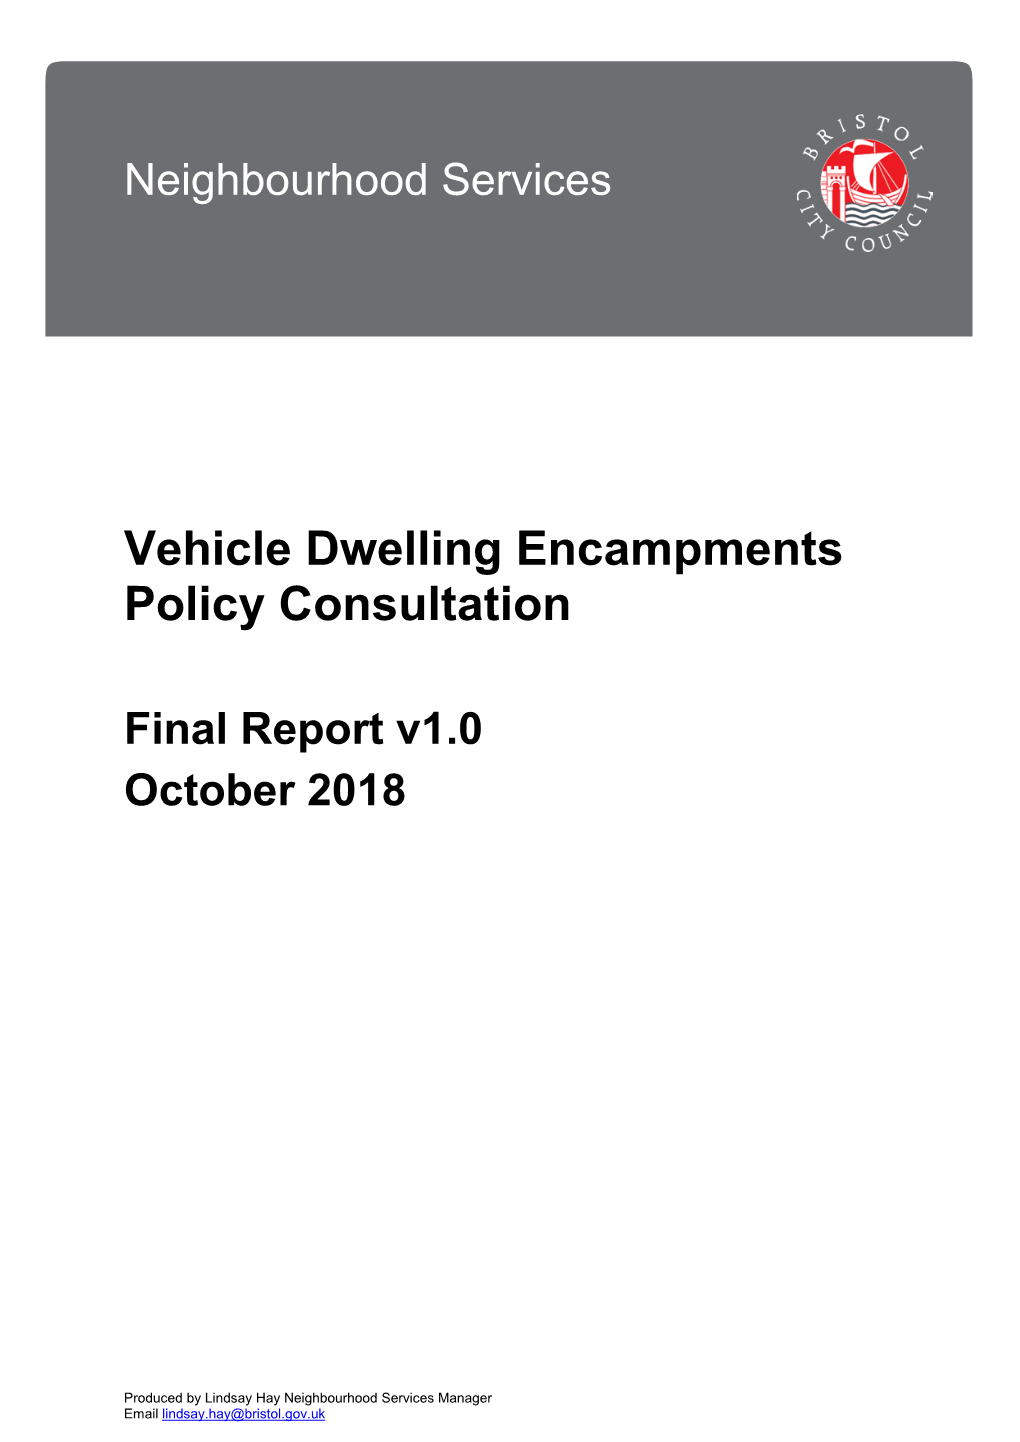 Vehicle Dwelling Encampments Policy Consultation